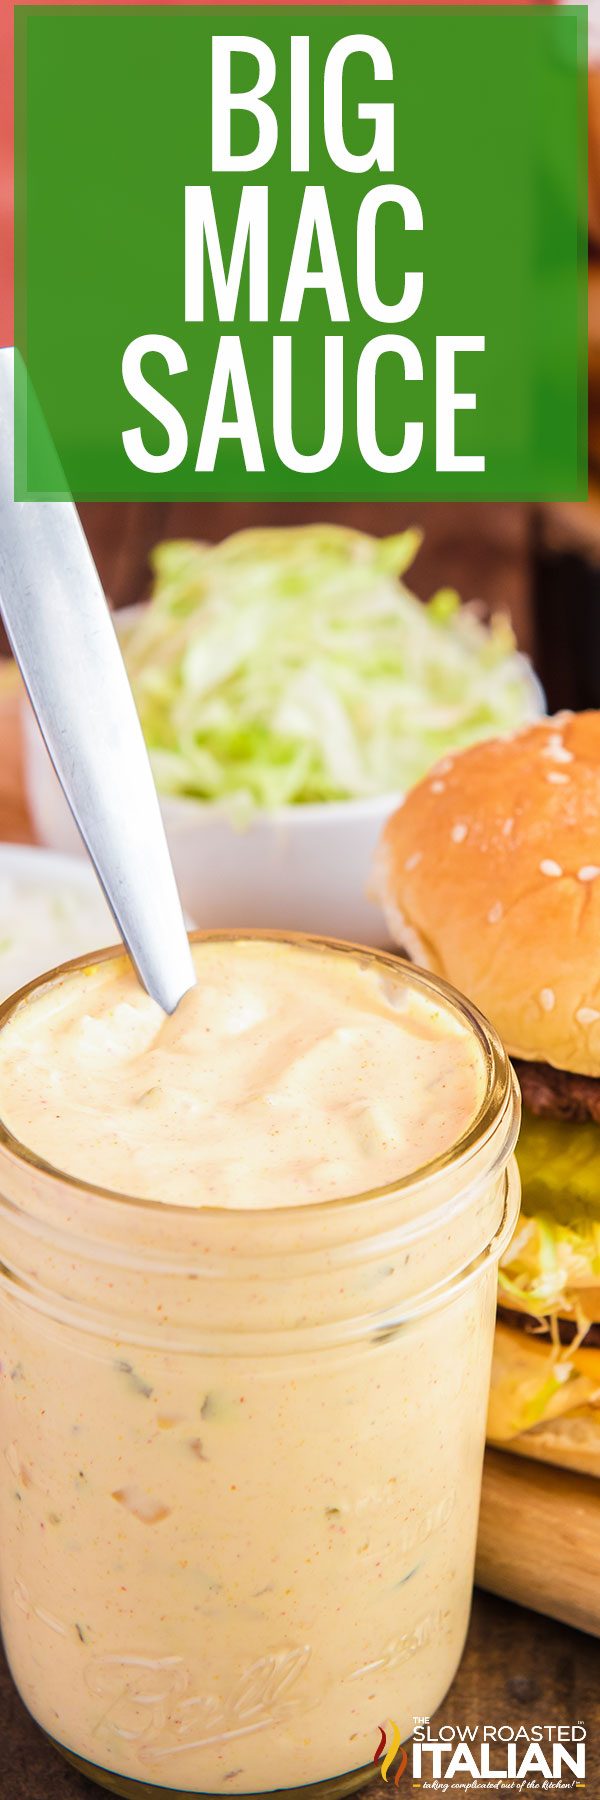 titled image (and shown): big mac sauce recipe